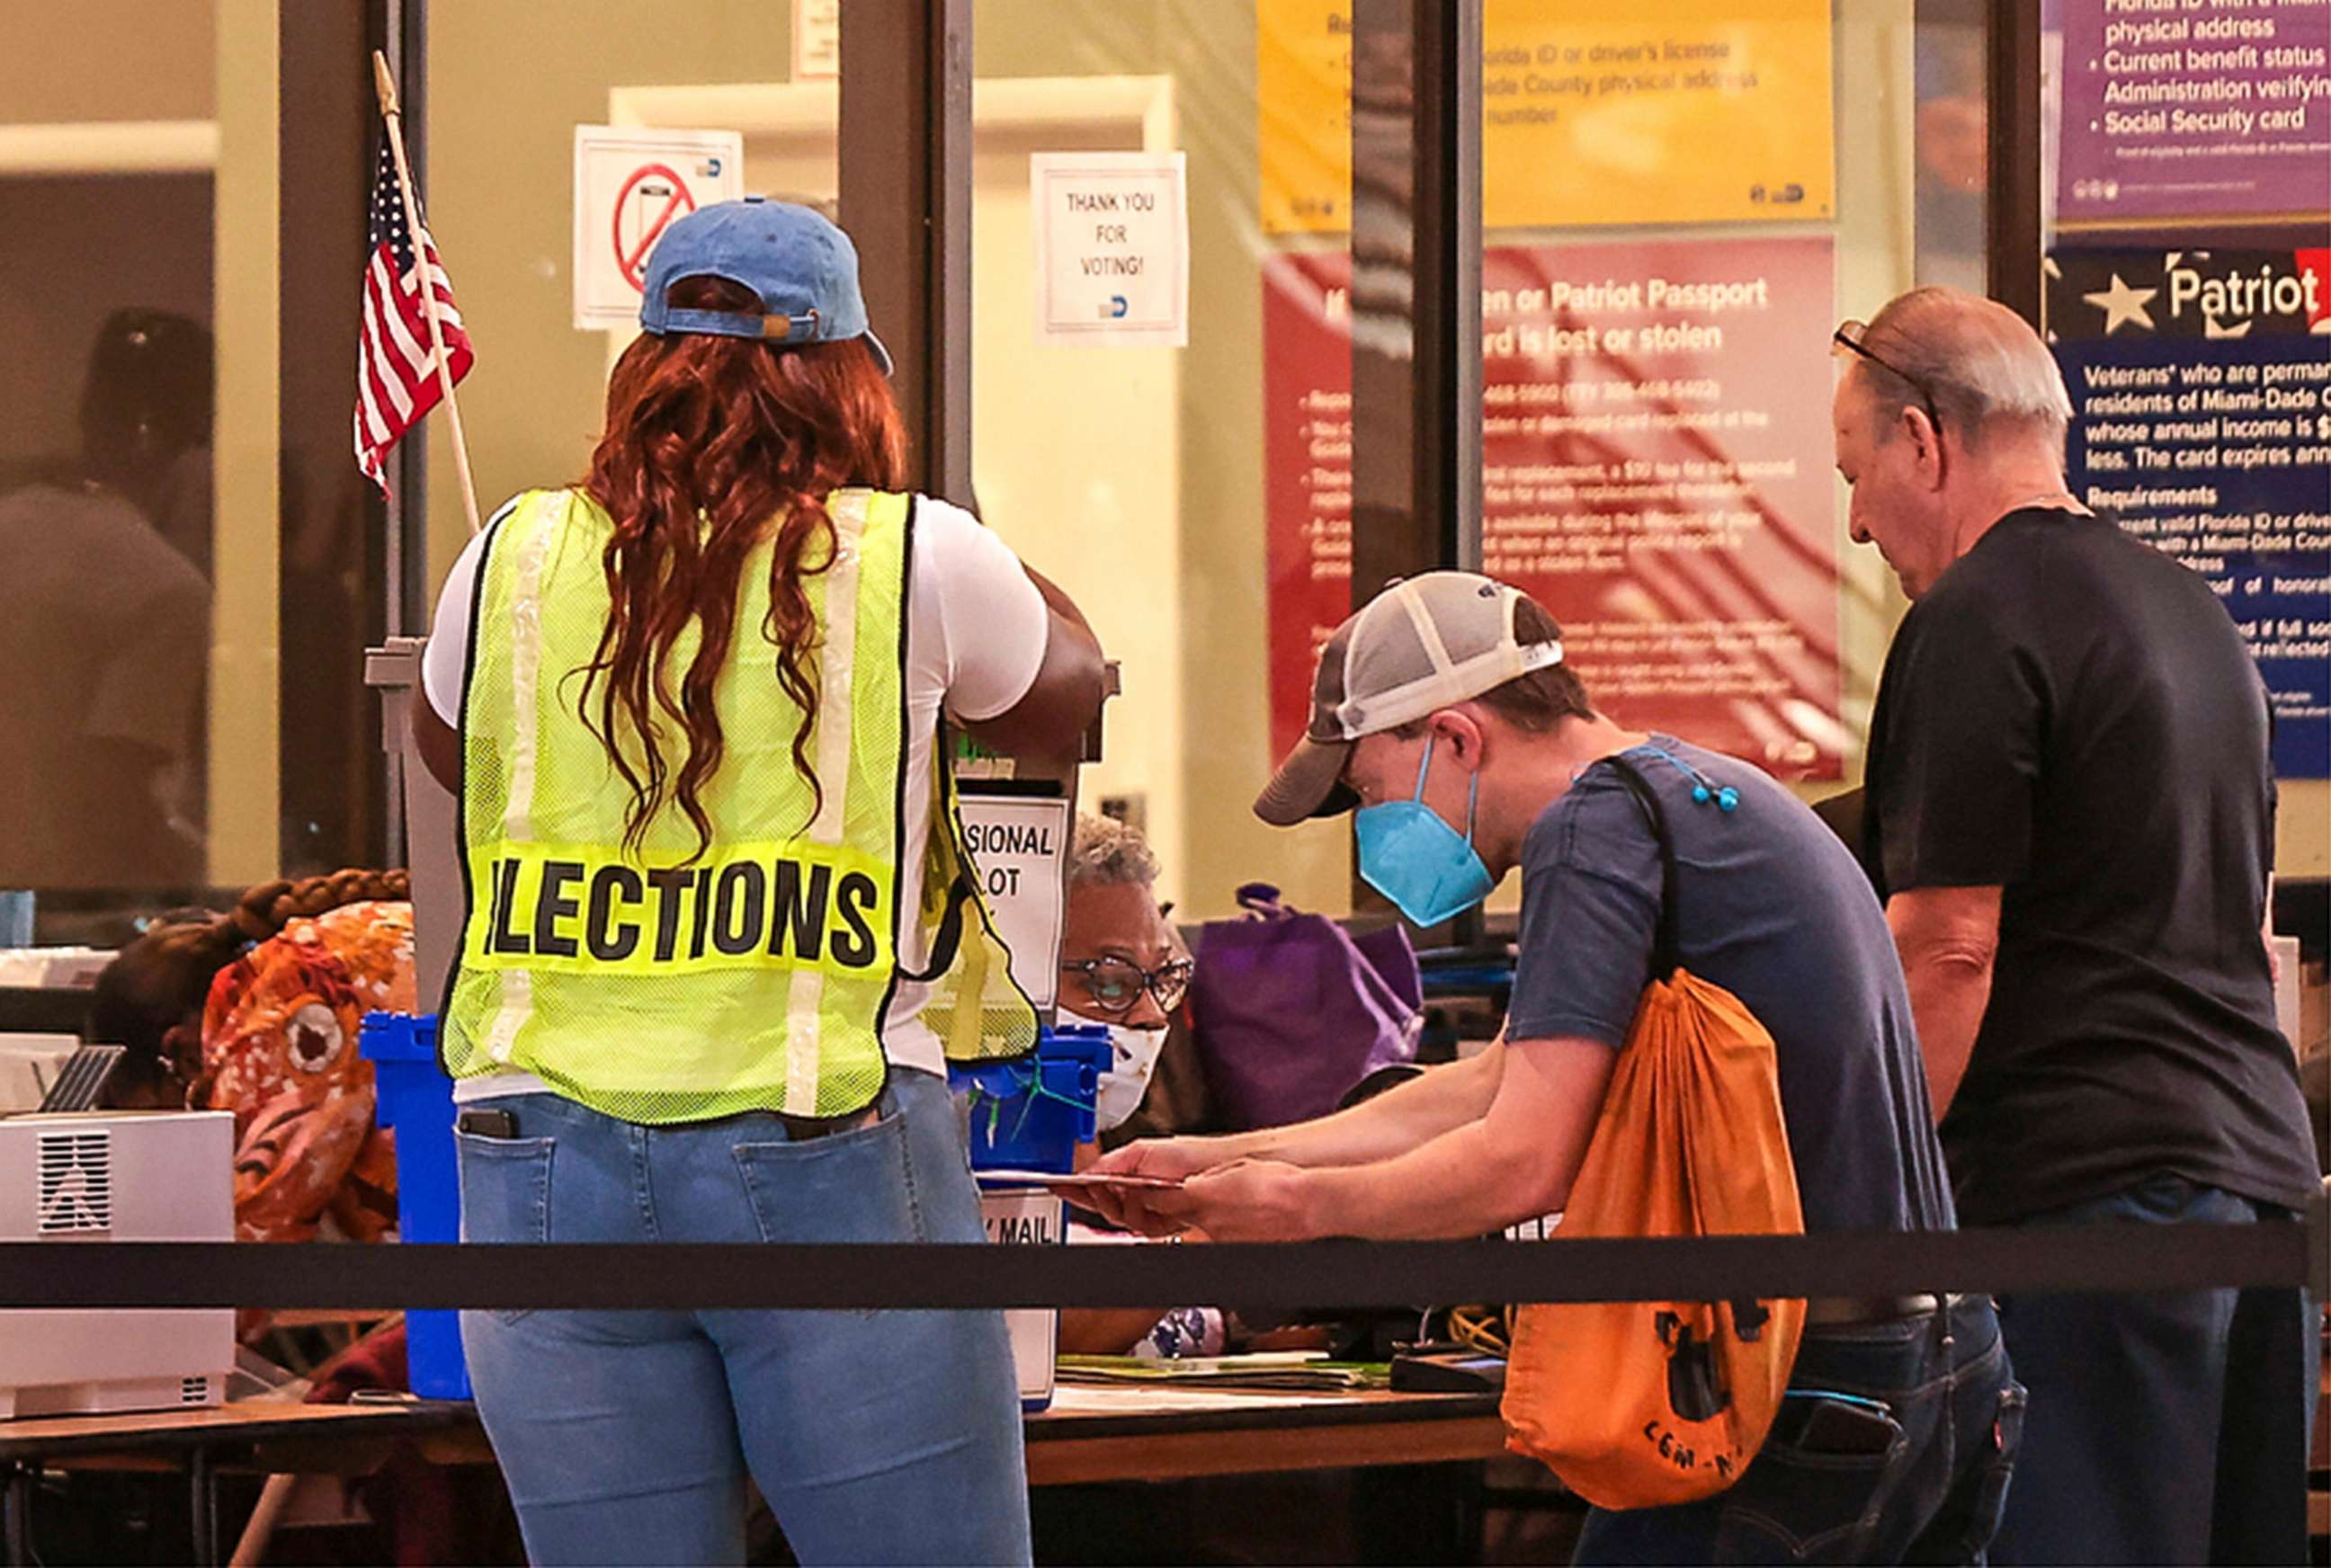 PHOTO: Miami-Dade residents cast their ballots during the first day of early voting in Miami-Dade County at the Miami-County Hall in downtown Miami, on Oct. 24, 2022.